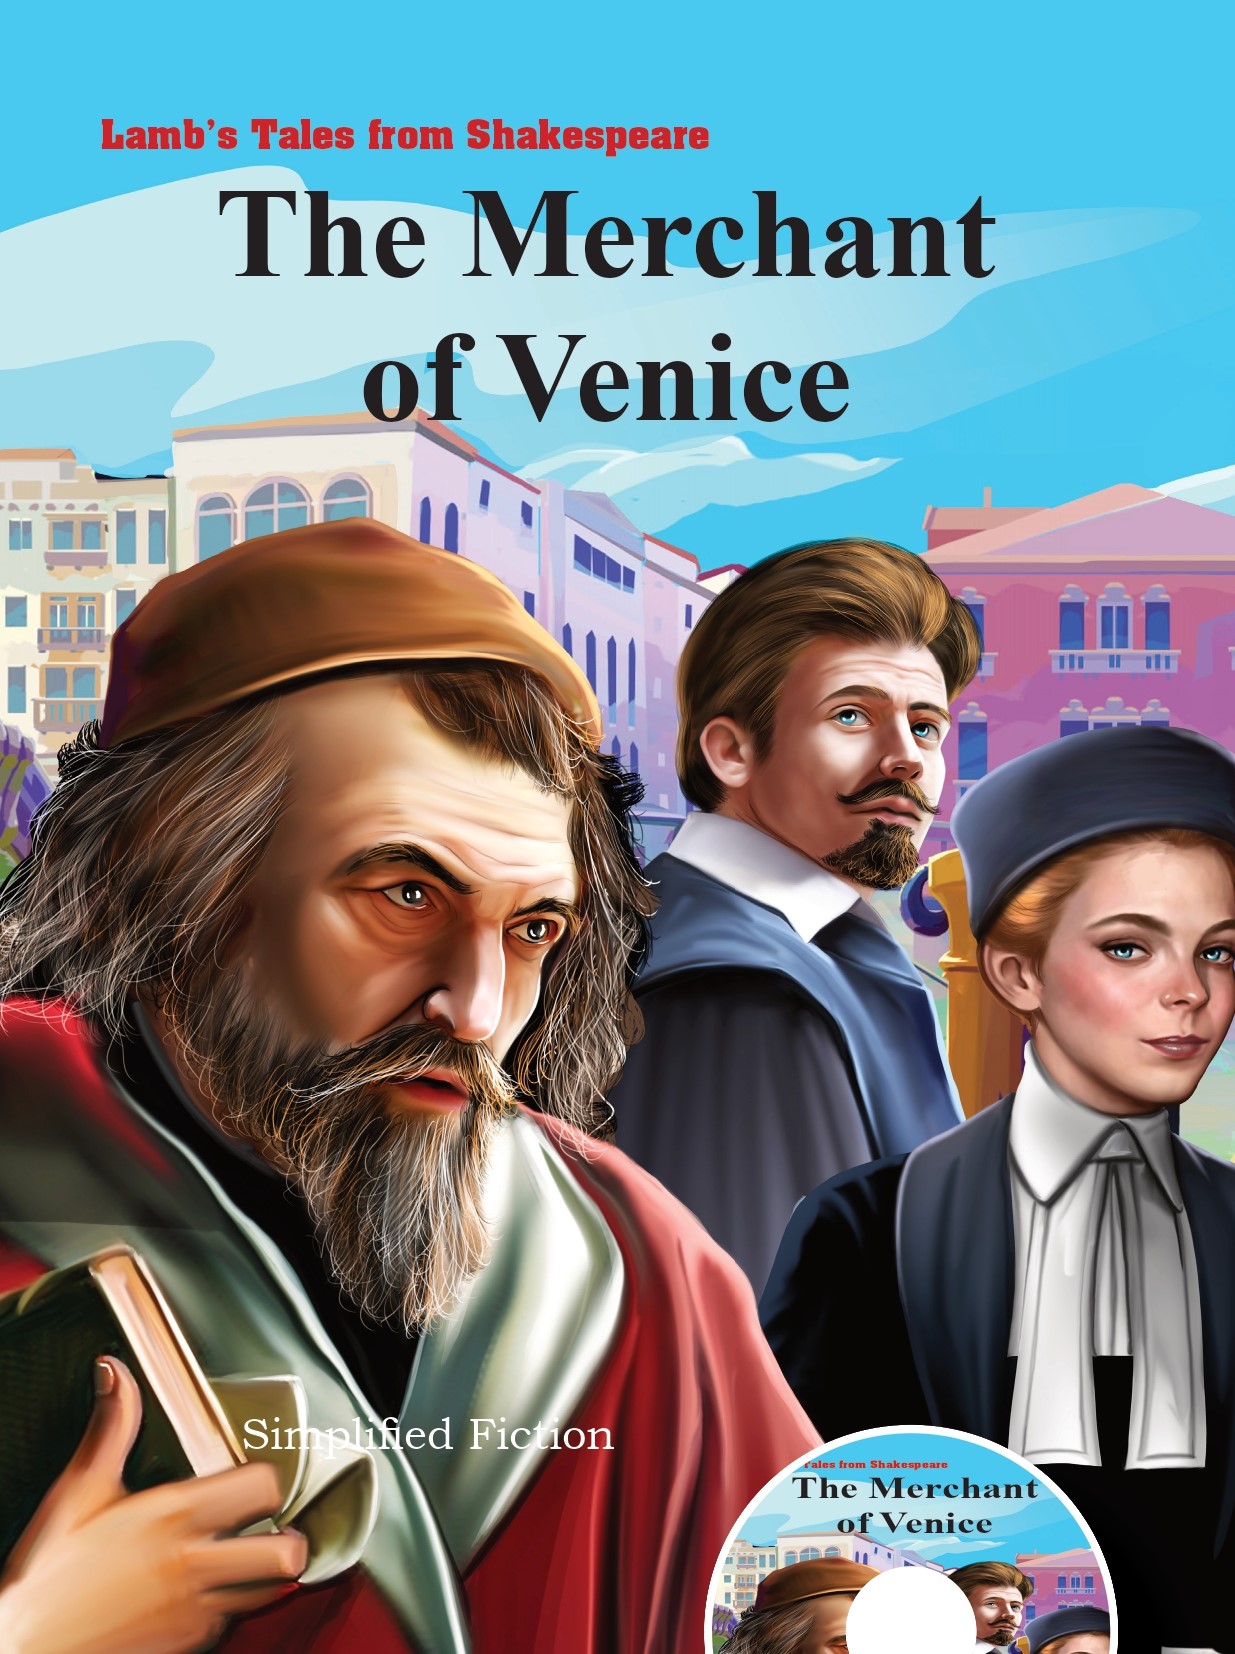 Lamb's Tales from Shakespeare -The Merchant of Venice - Simplified Fiction